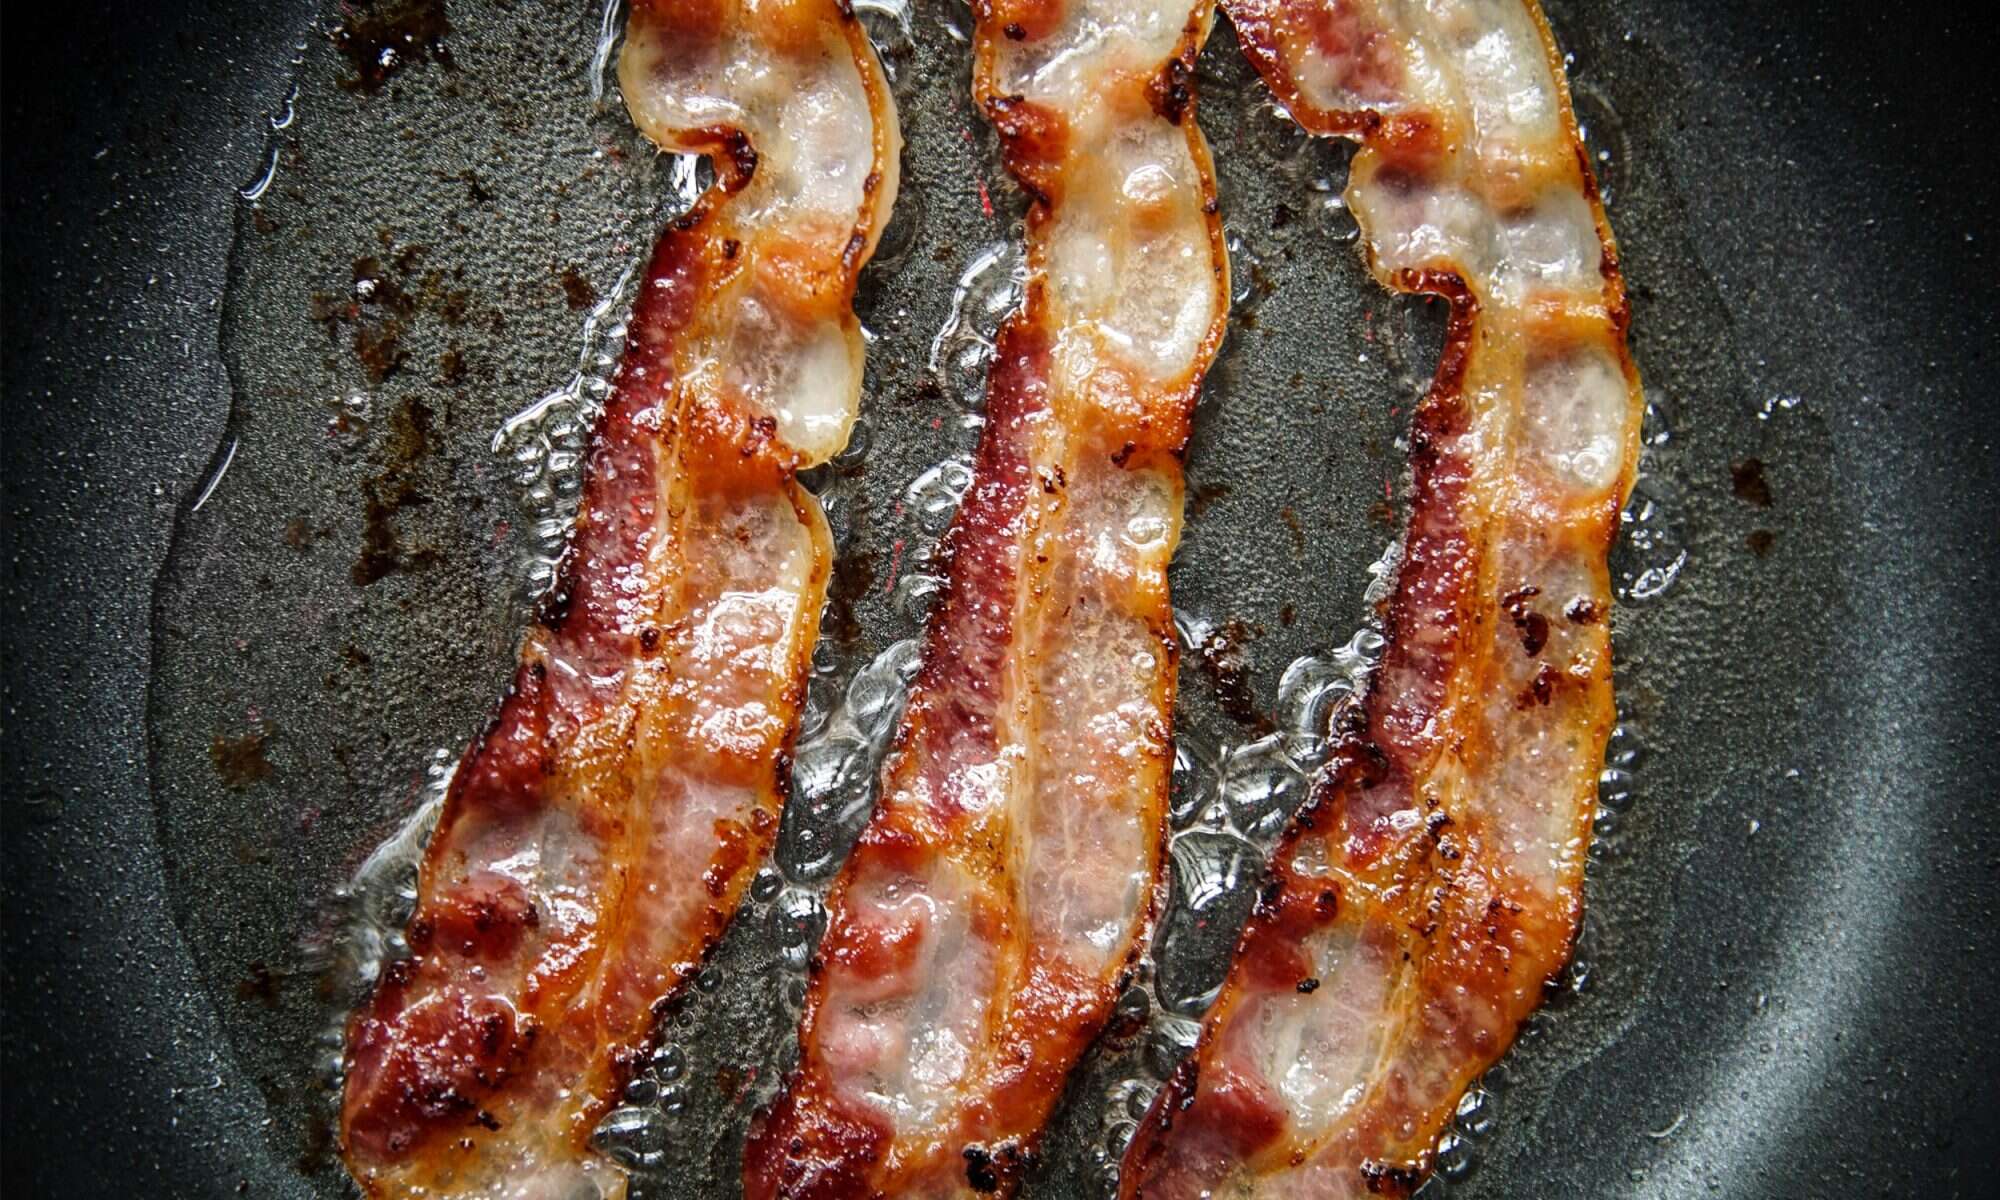 20 Ways to Use Bacon Grease - What to Cook with Bacon Grease